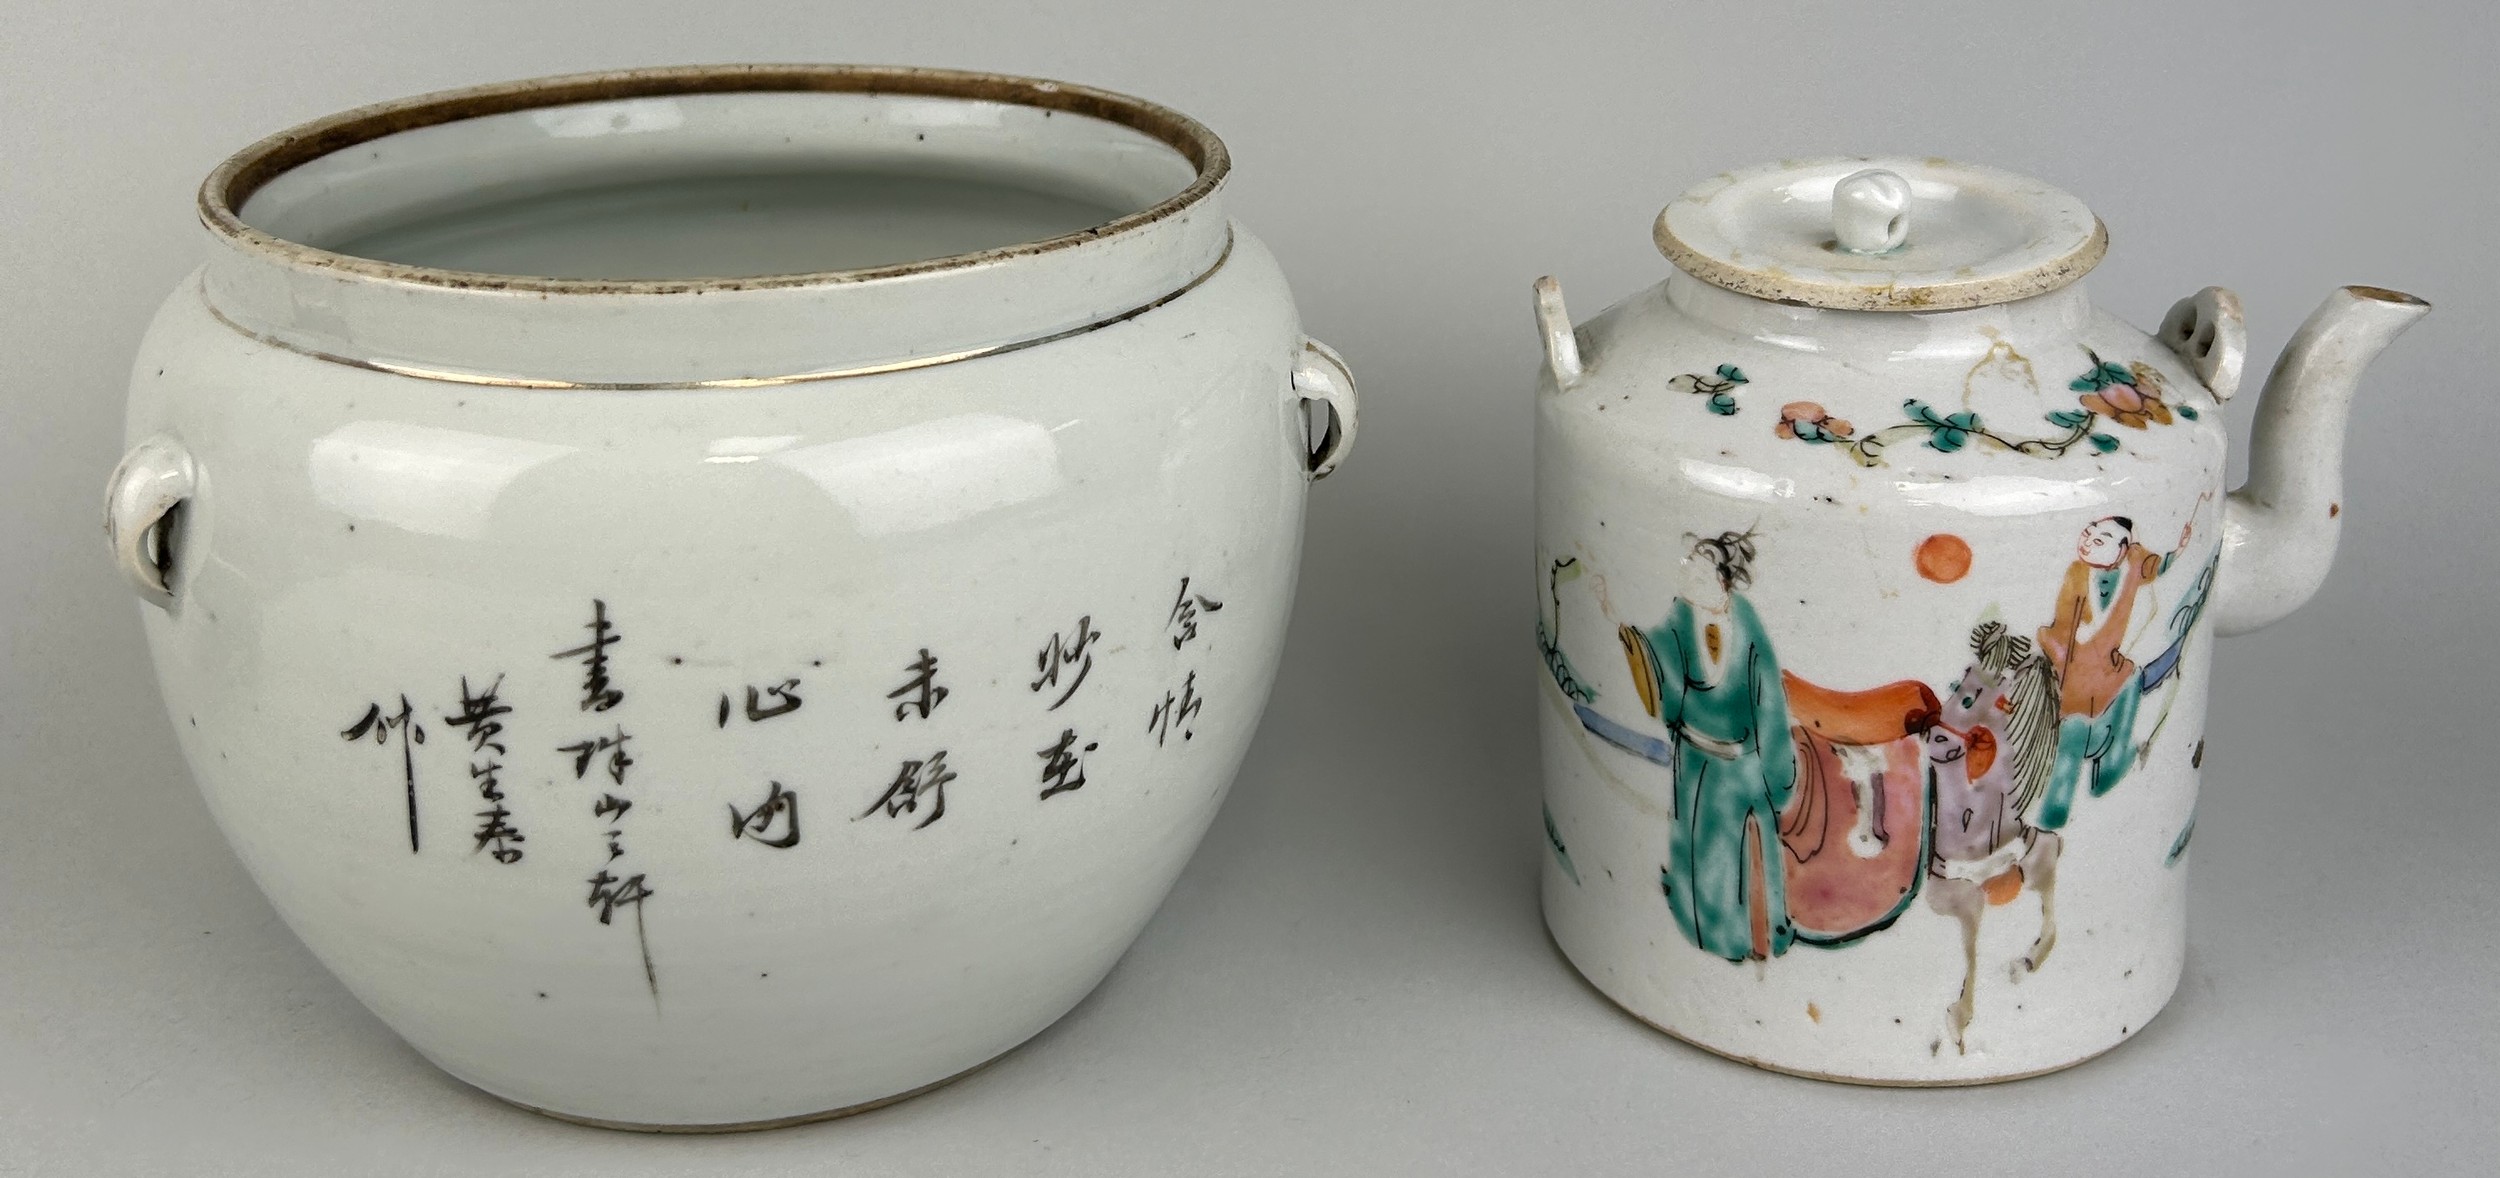 A CHINESE PORCELAIN POT WITH LUG HANDLES AND CALLIGRAPHY, ALONG WITH A CHINESE PORCELAIN TEAPOT - Image 2 of 2